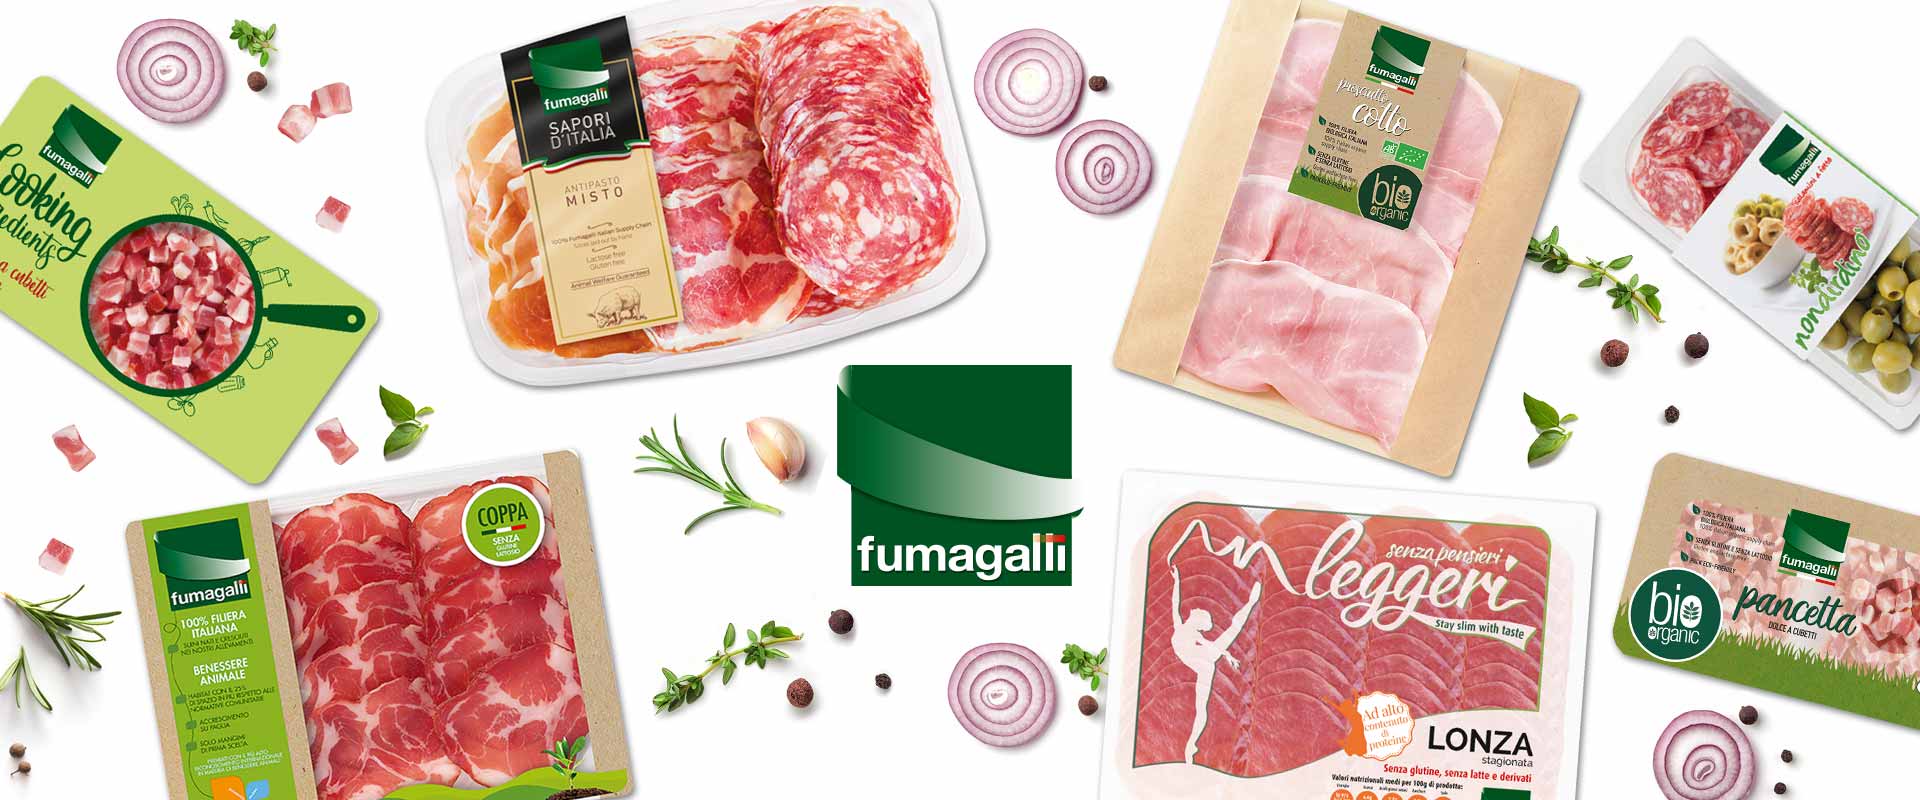 Fumagalli Packaging, A different range of cured meats for everyone